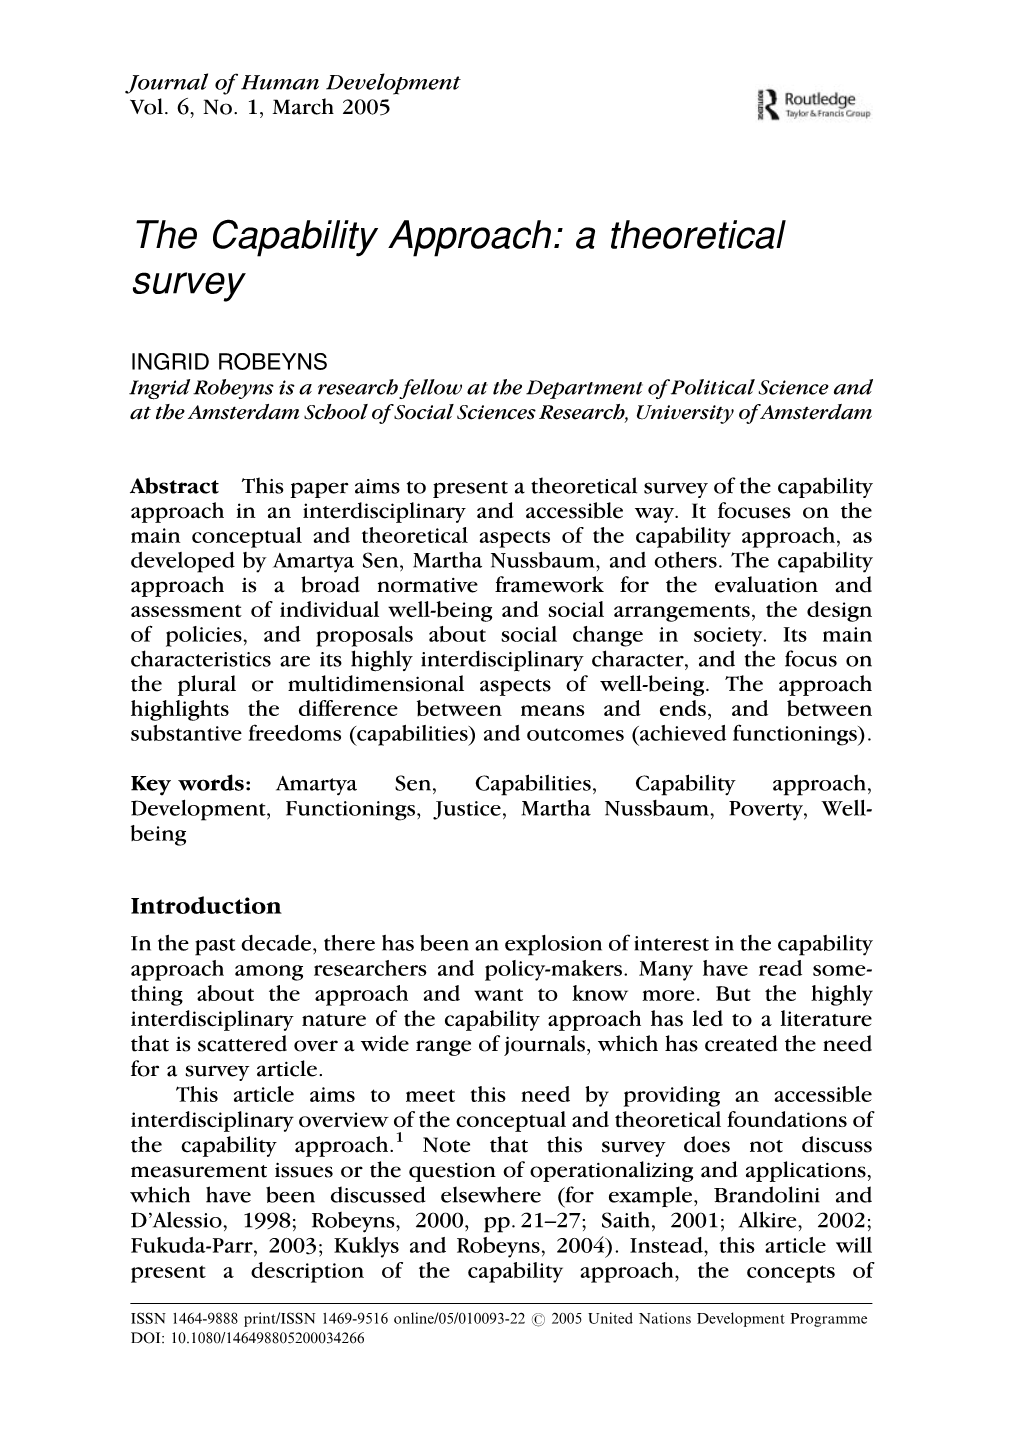 The Capability Approach: a Theoretical Survey